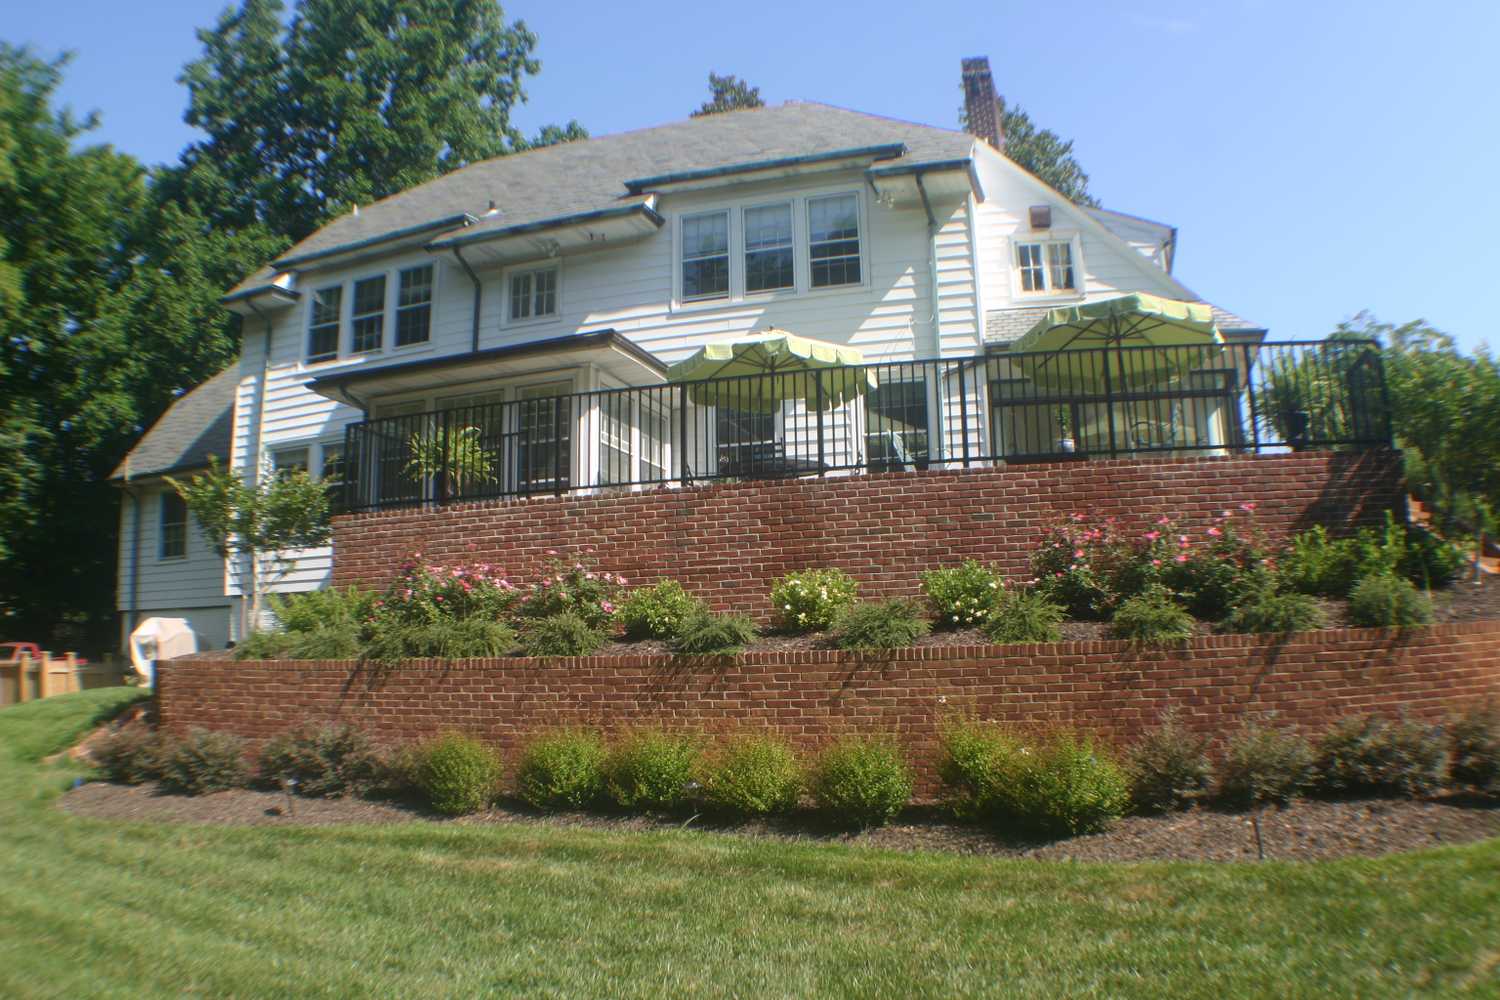 Richmond Commercial Landscaping